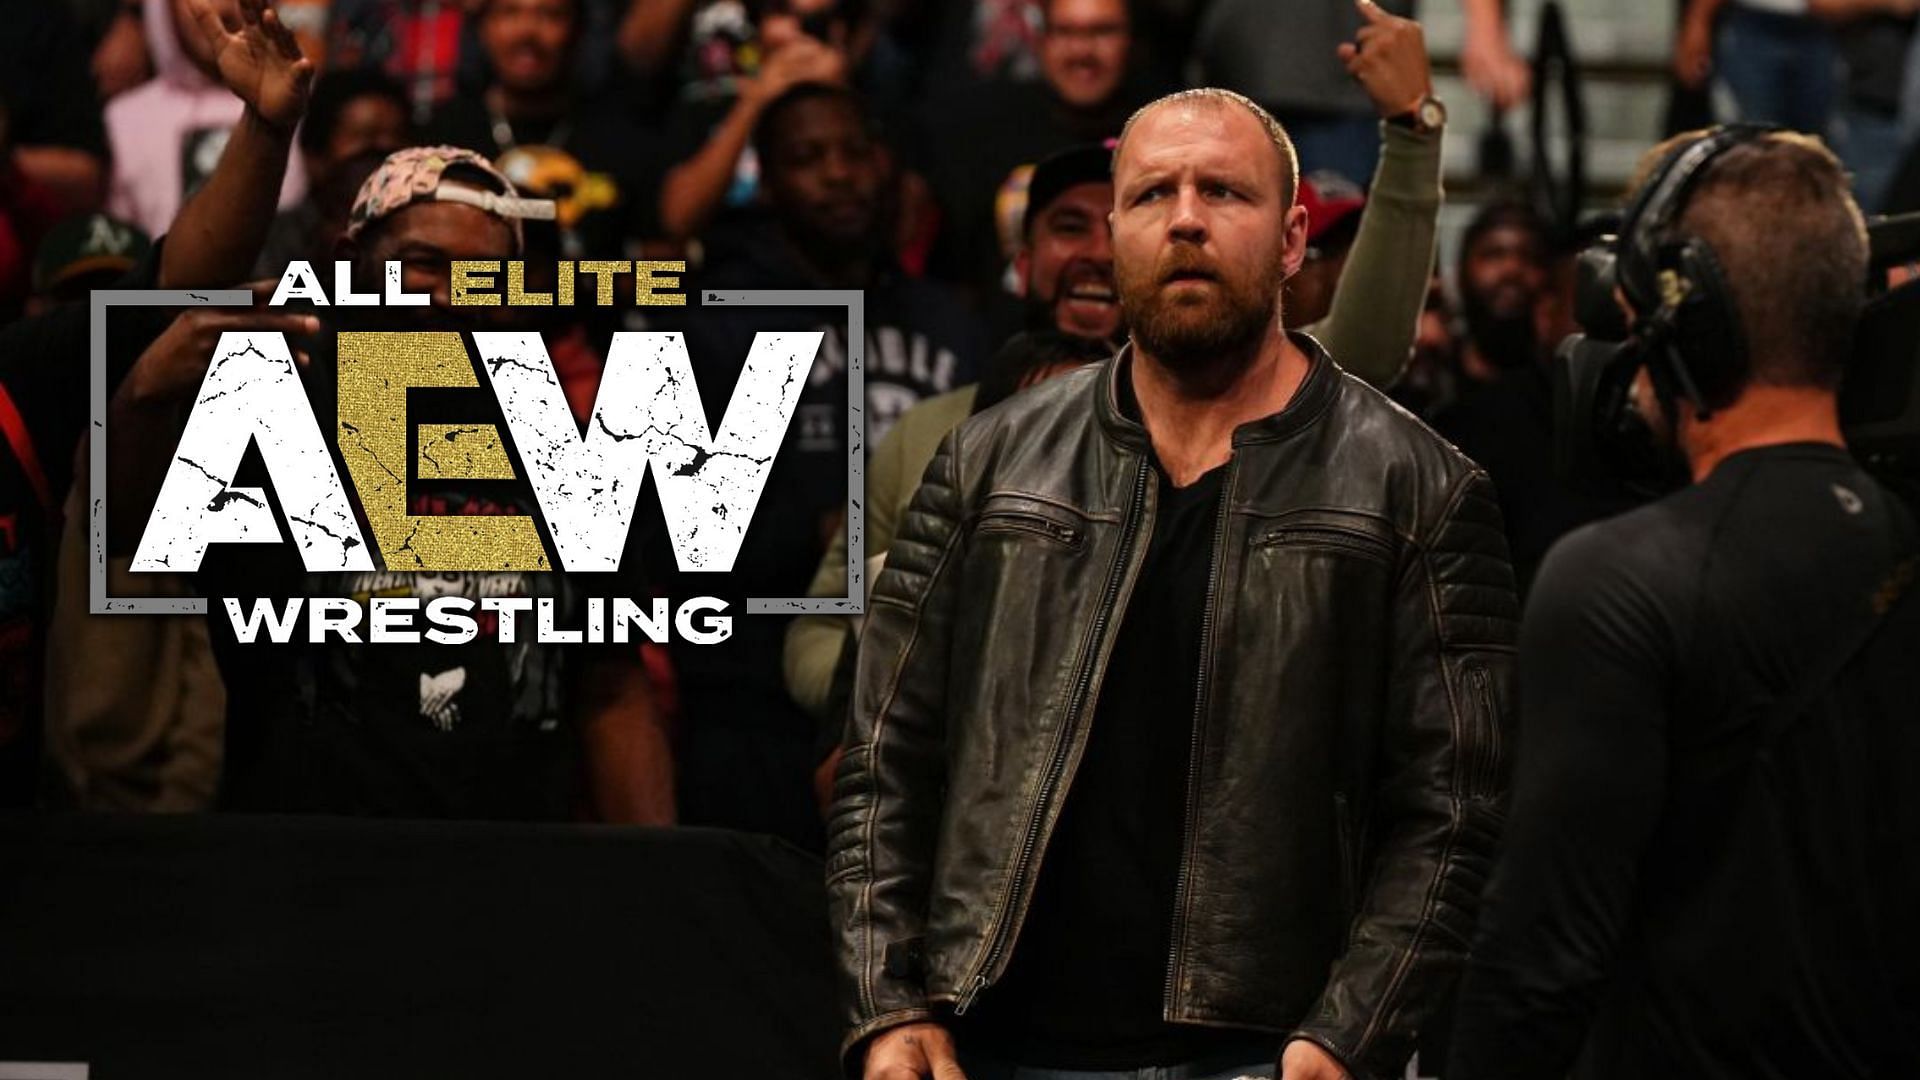 Jon Moxley has a big challenge coming up at Revolution